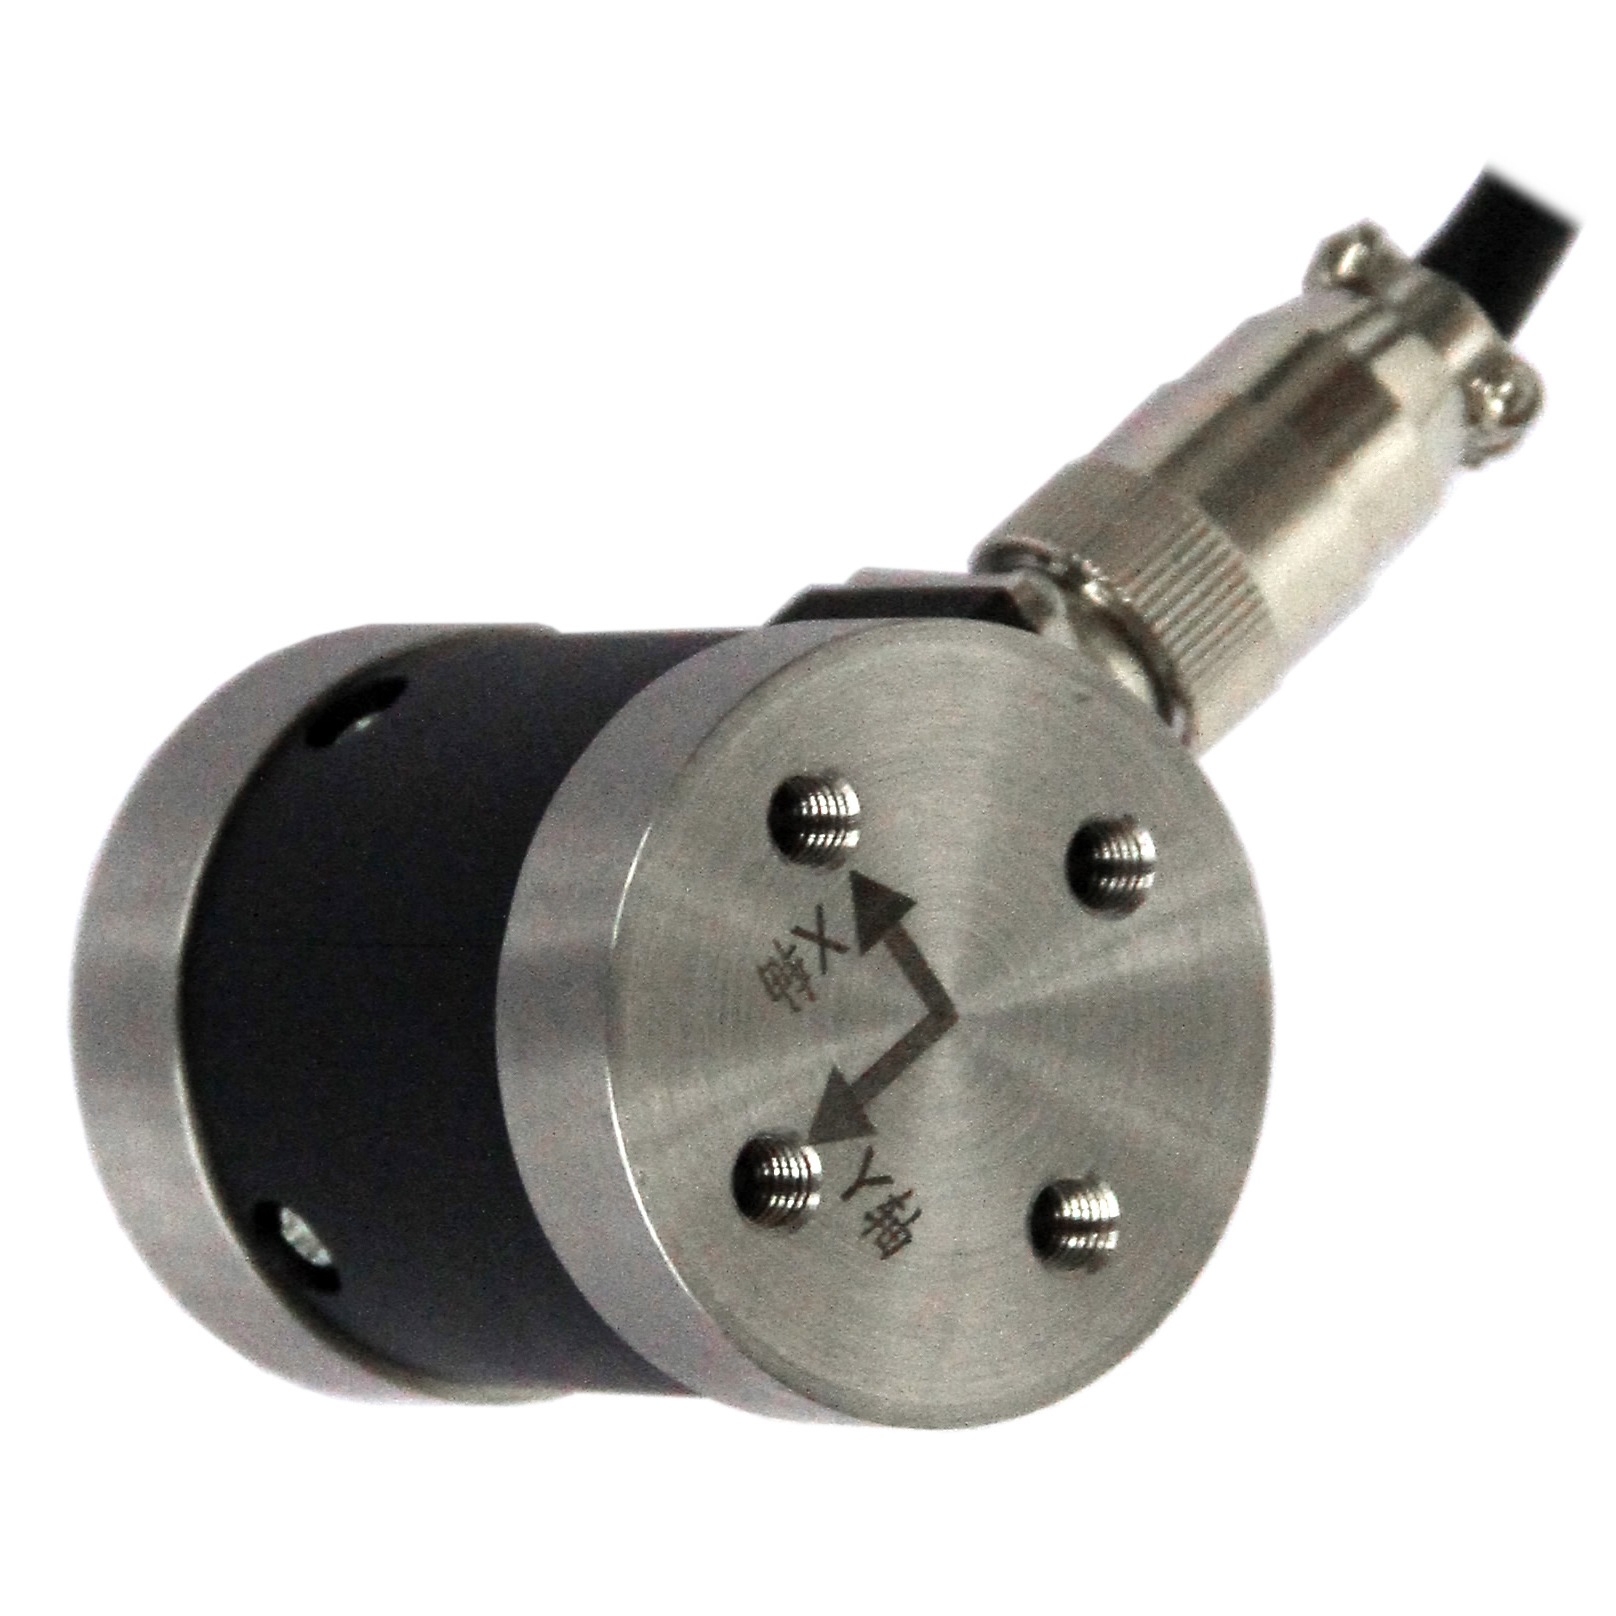 LCX2002 Multi-Axis Force Torque Sensors 2 Axis Compression And Torque Force Sensor